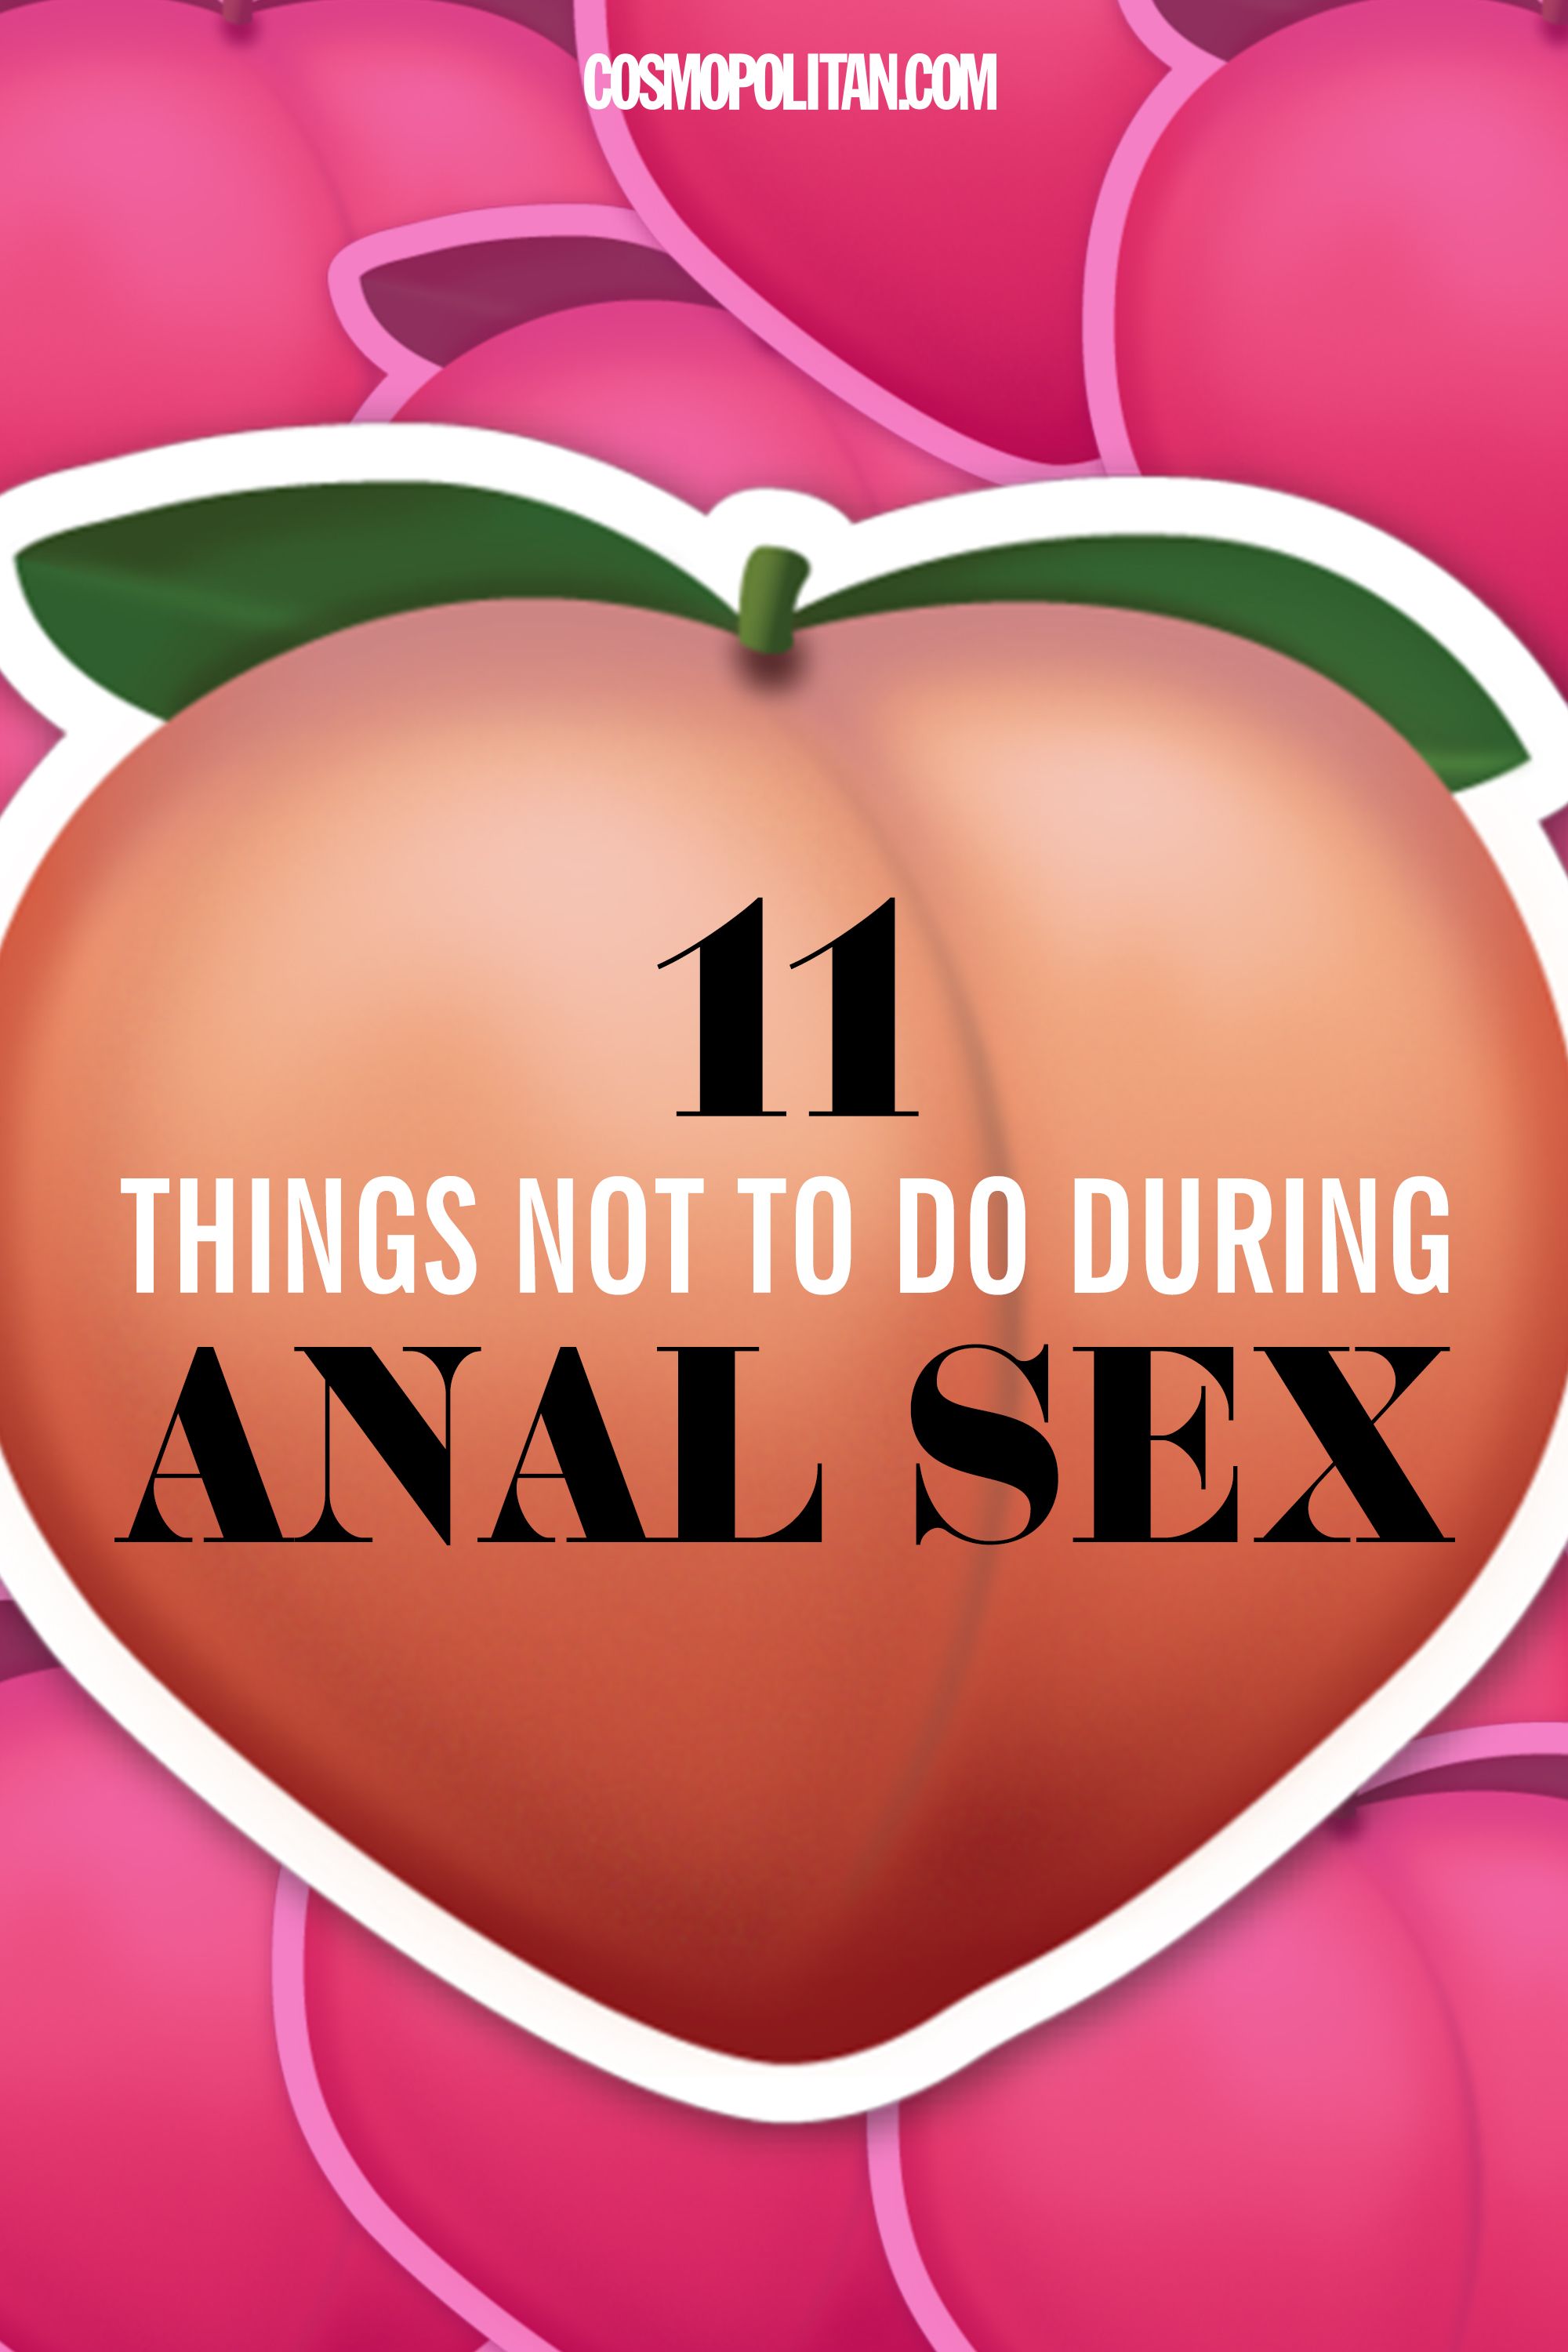 Give me anal sex